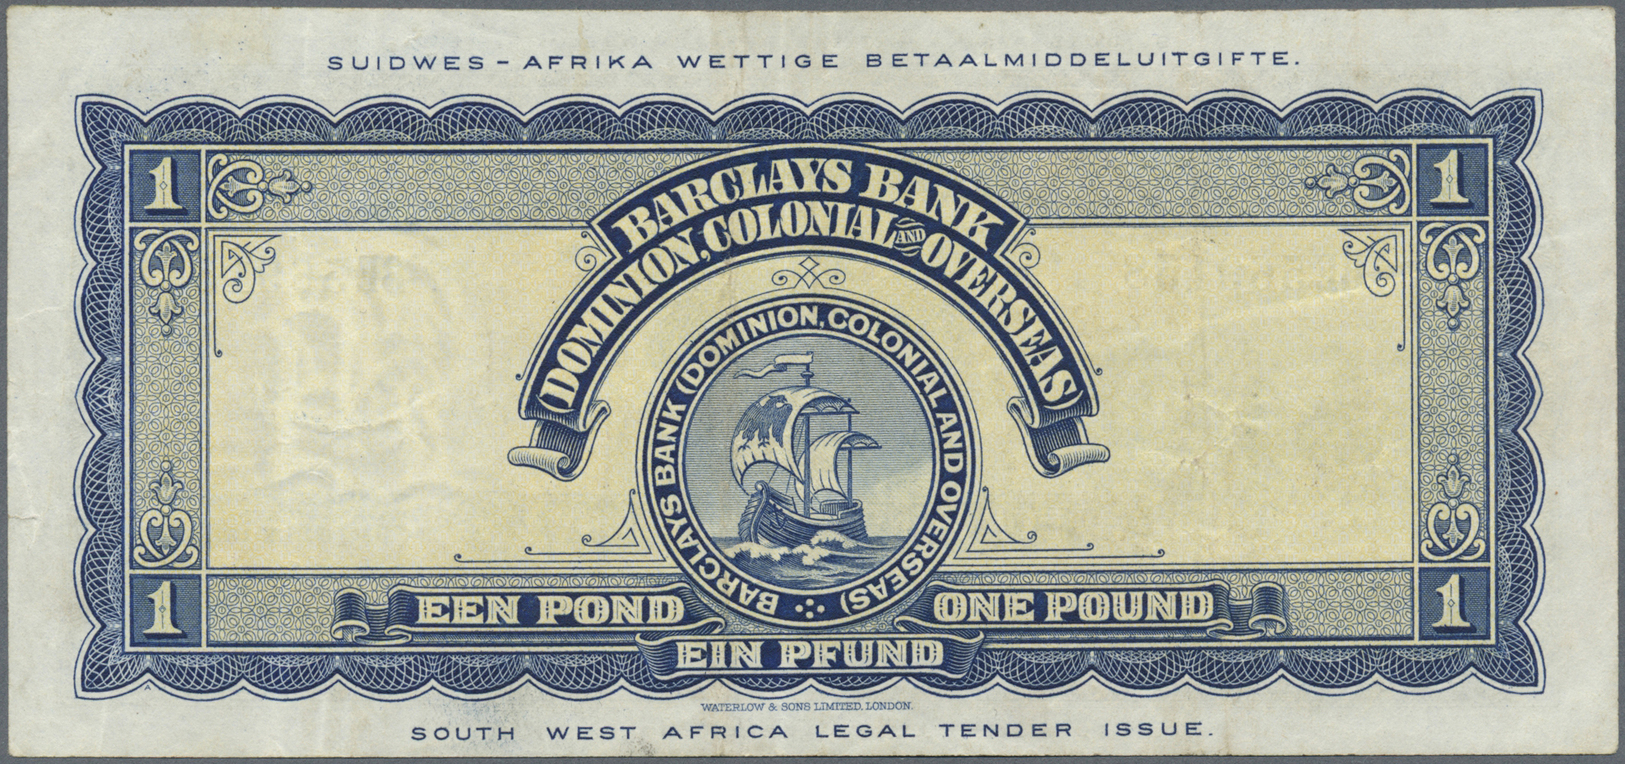 02975 Southwest Africa: 1 Pound 1954 P. 2, Light Folds In Paper, No Holes, One 3mm Tear At Right, Still Strong Paper And - Namibie